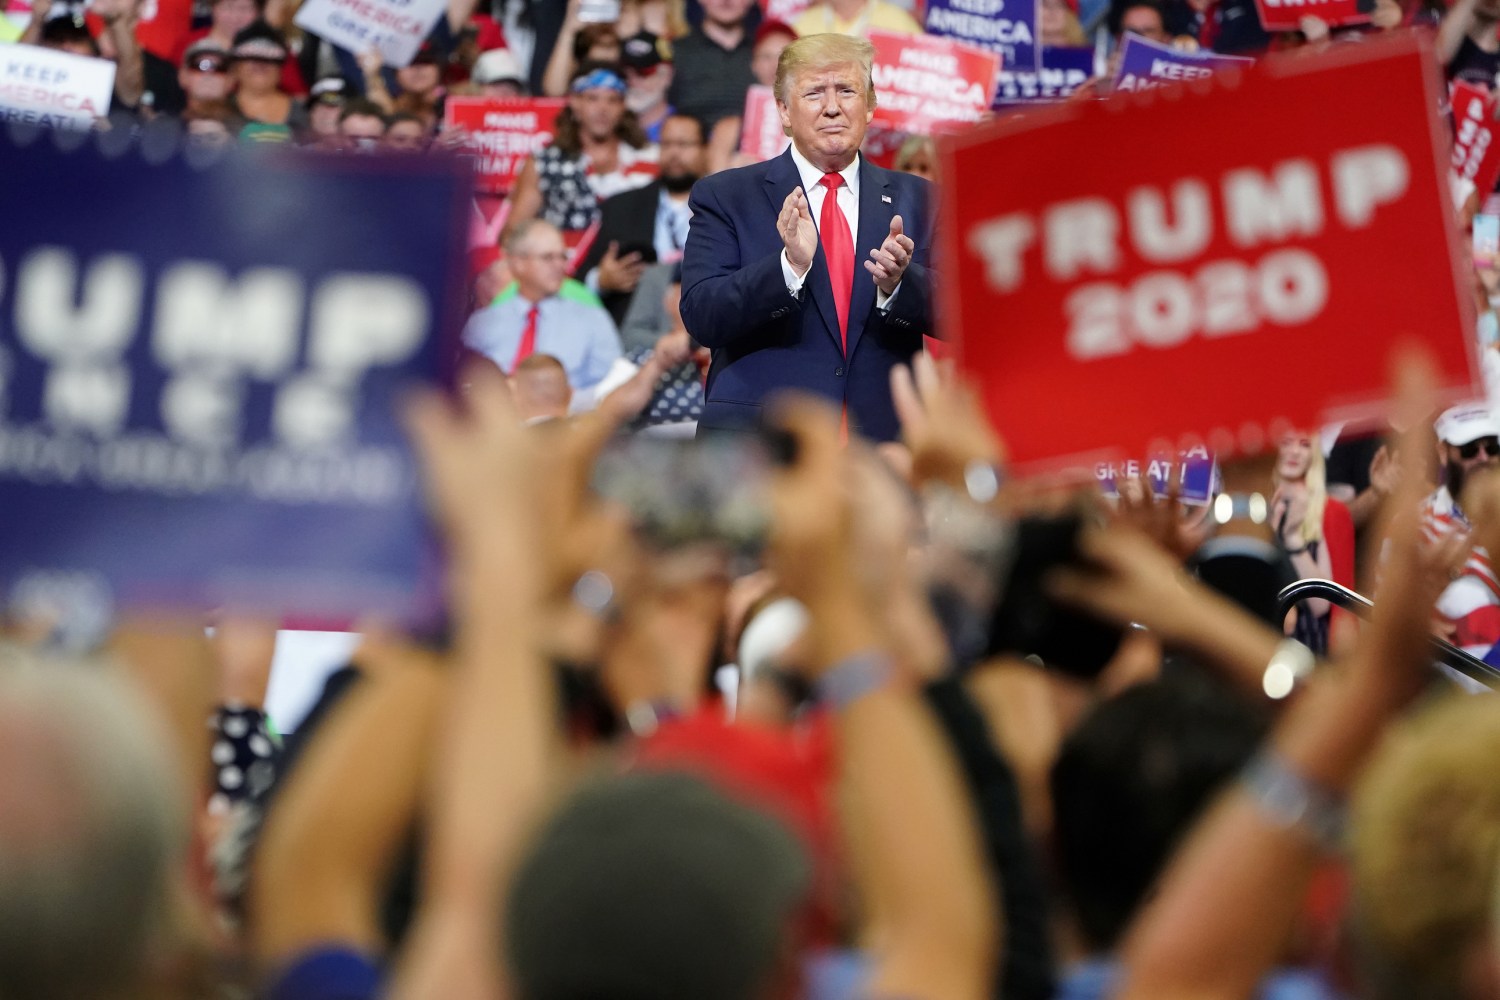 U.S. President Donald Trump speaks at a campaign kick off rally at the Amway Center in Orlando, Florida, U.S., June 18, 2019. REUTERS/Carlo Allegri - RC1ADE2C1FE0